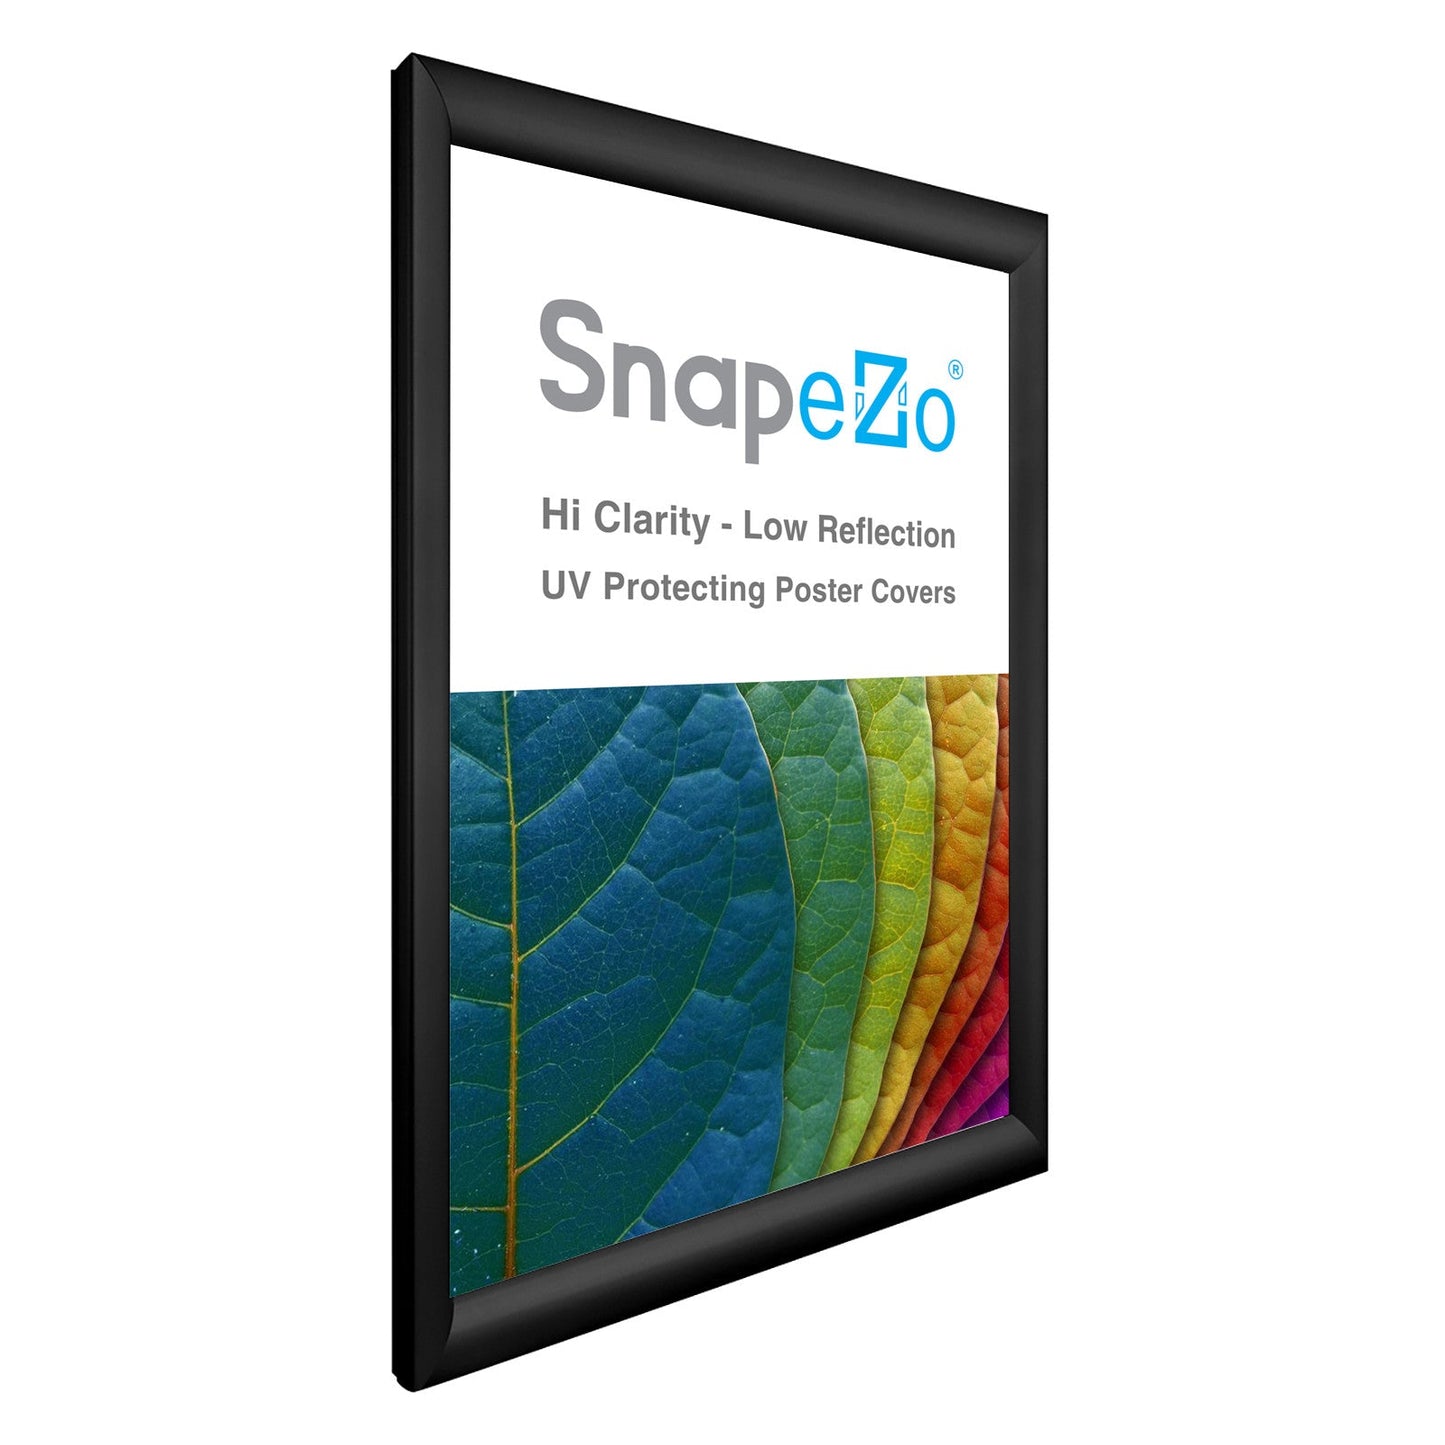 Load image into Gallery viewer, 15x23 Black SnapeZo® Snap Frame - 1.2&amp;quot; Profile
